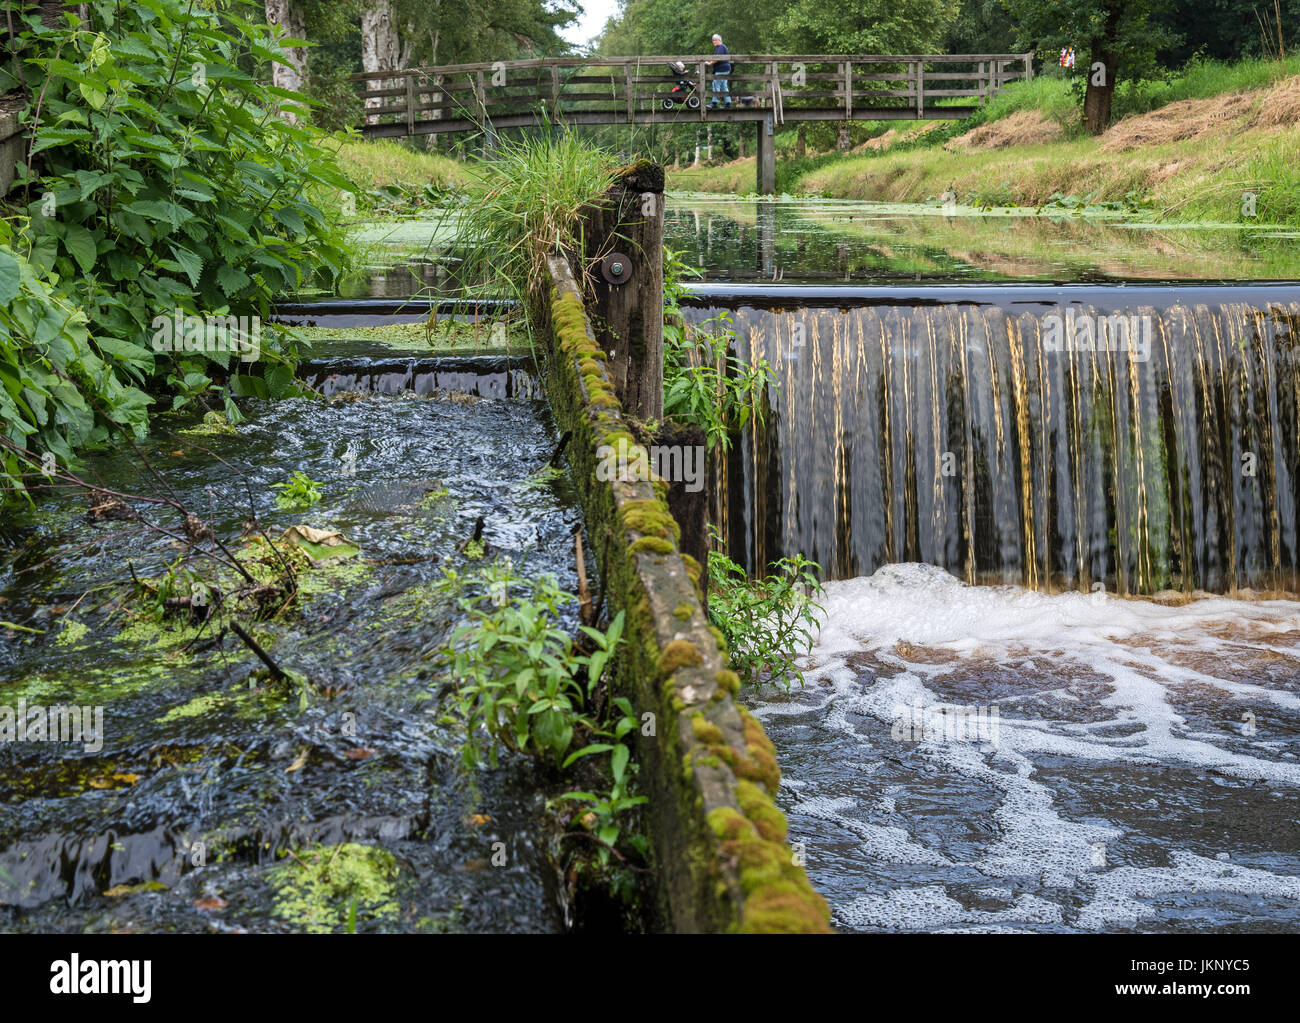 A side arm of the Oste-Hamme-Kanal, with a fish ladder on the left, near Findorf, Germany, 24 July 2017. Photo: Ingo Wagner/dpa Stock Photo